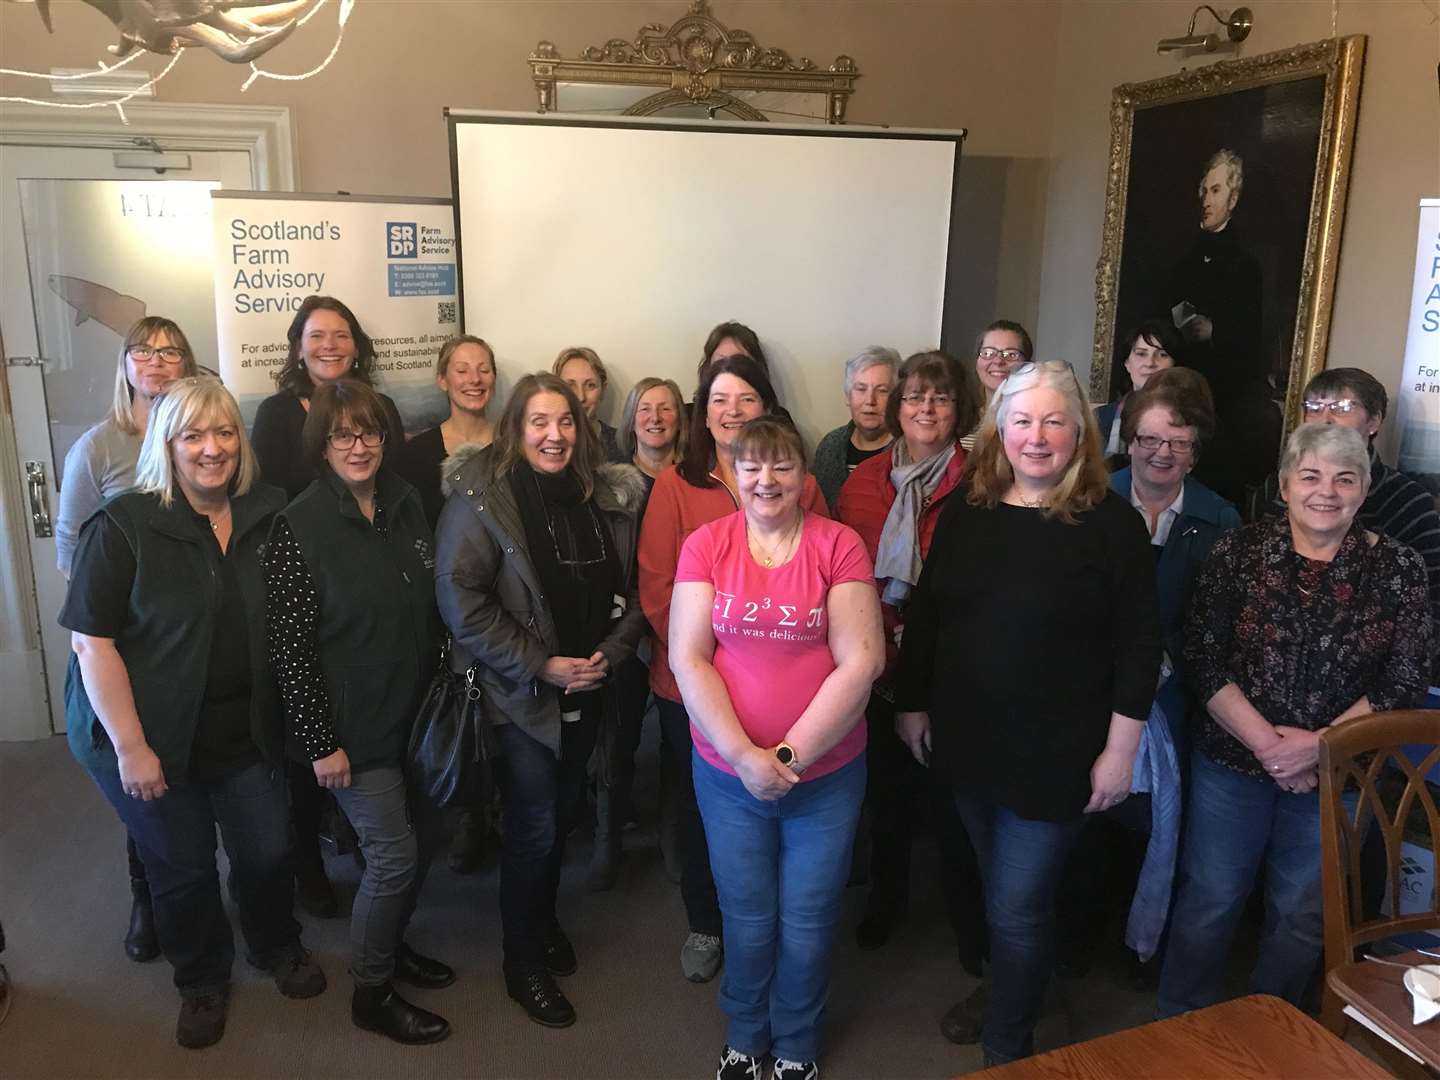 Those who took part in the latest local Women in Agriculture event with some of the SAC consultants who helped organise it.